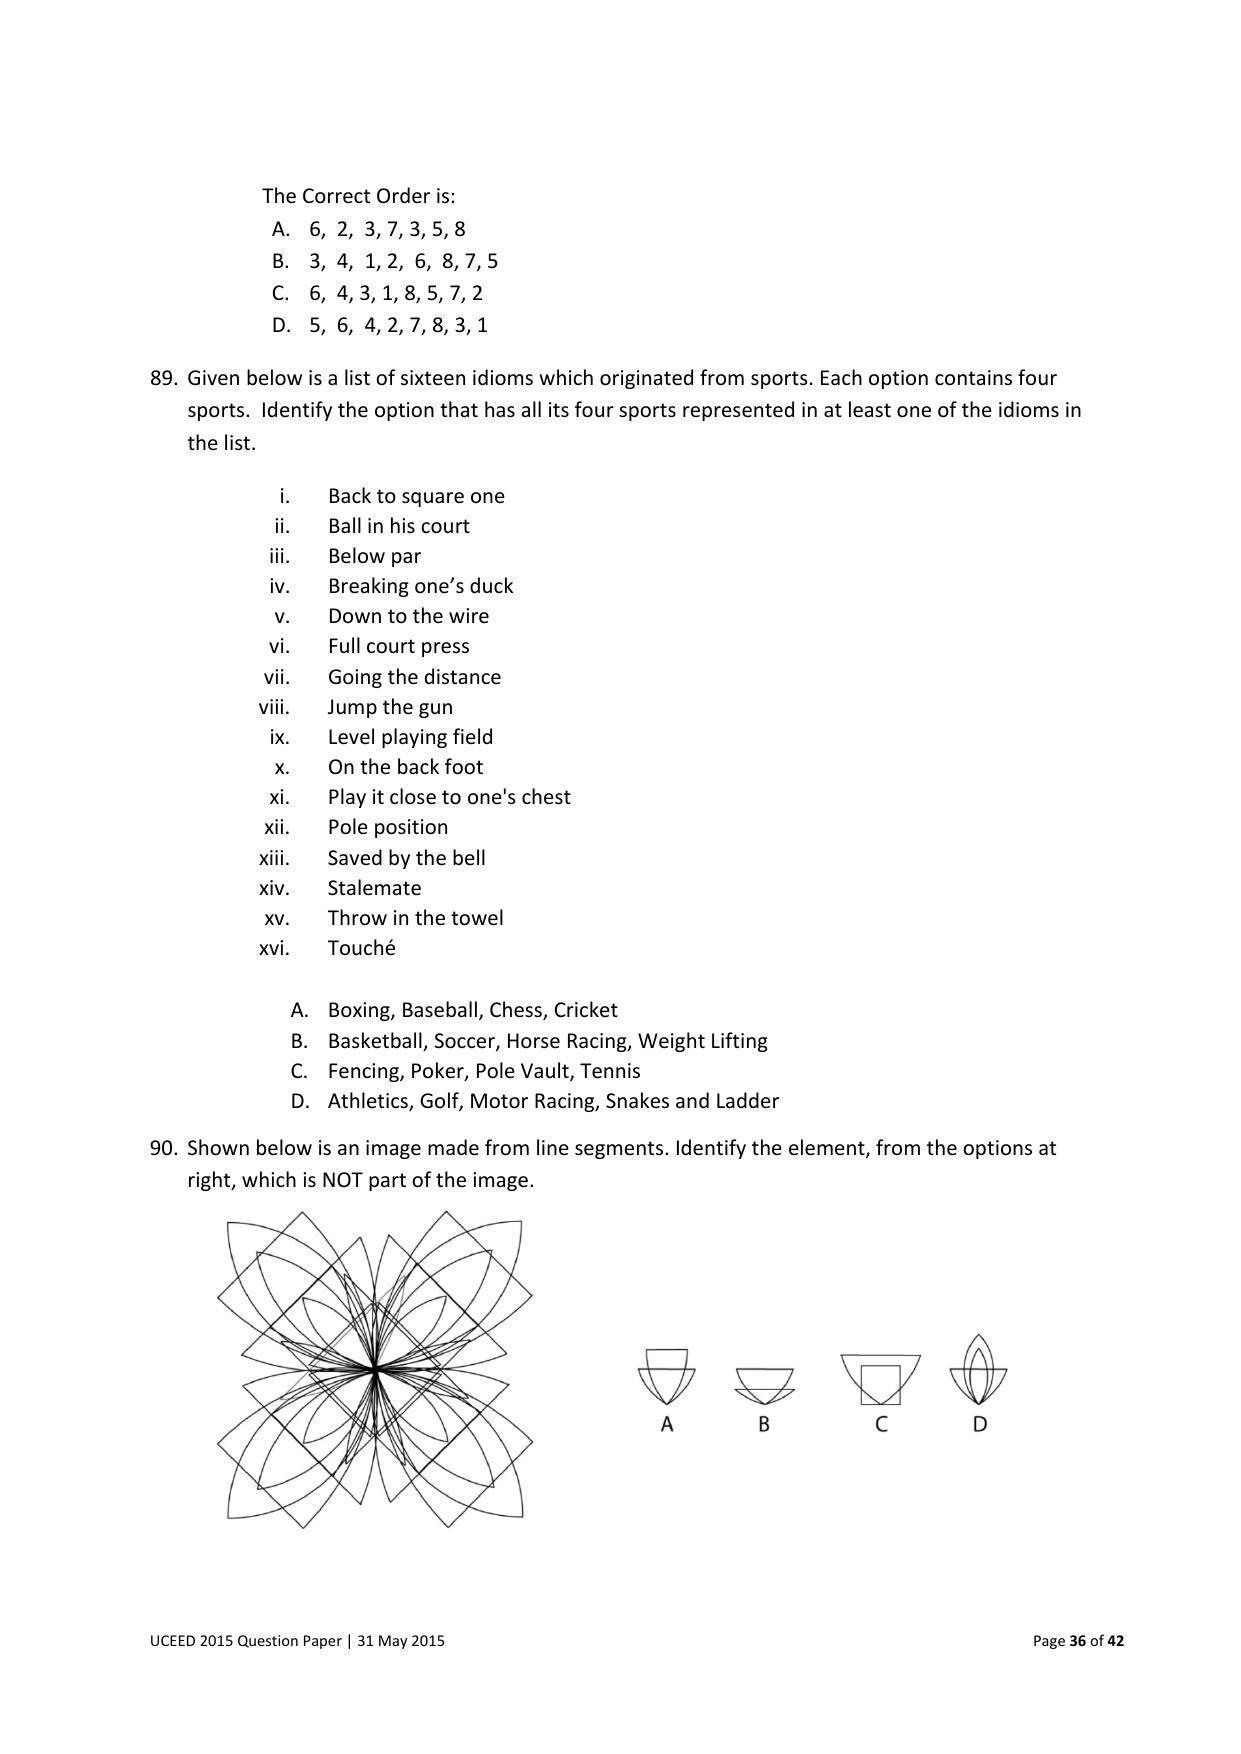 UCEED 2015 Question Paper - Page 36